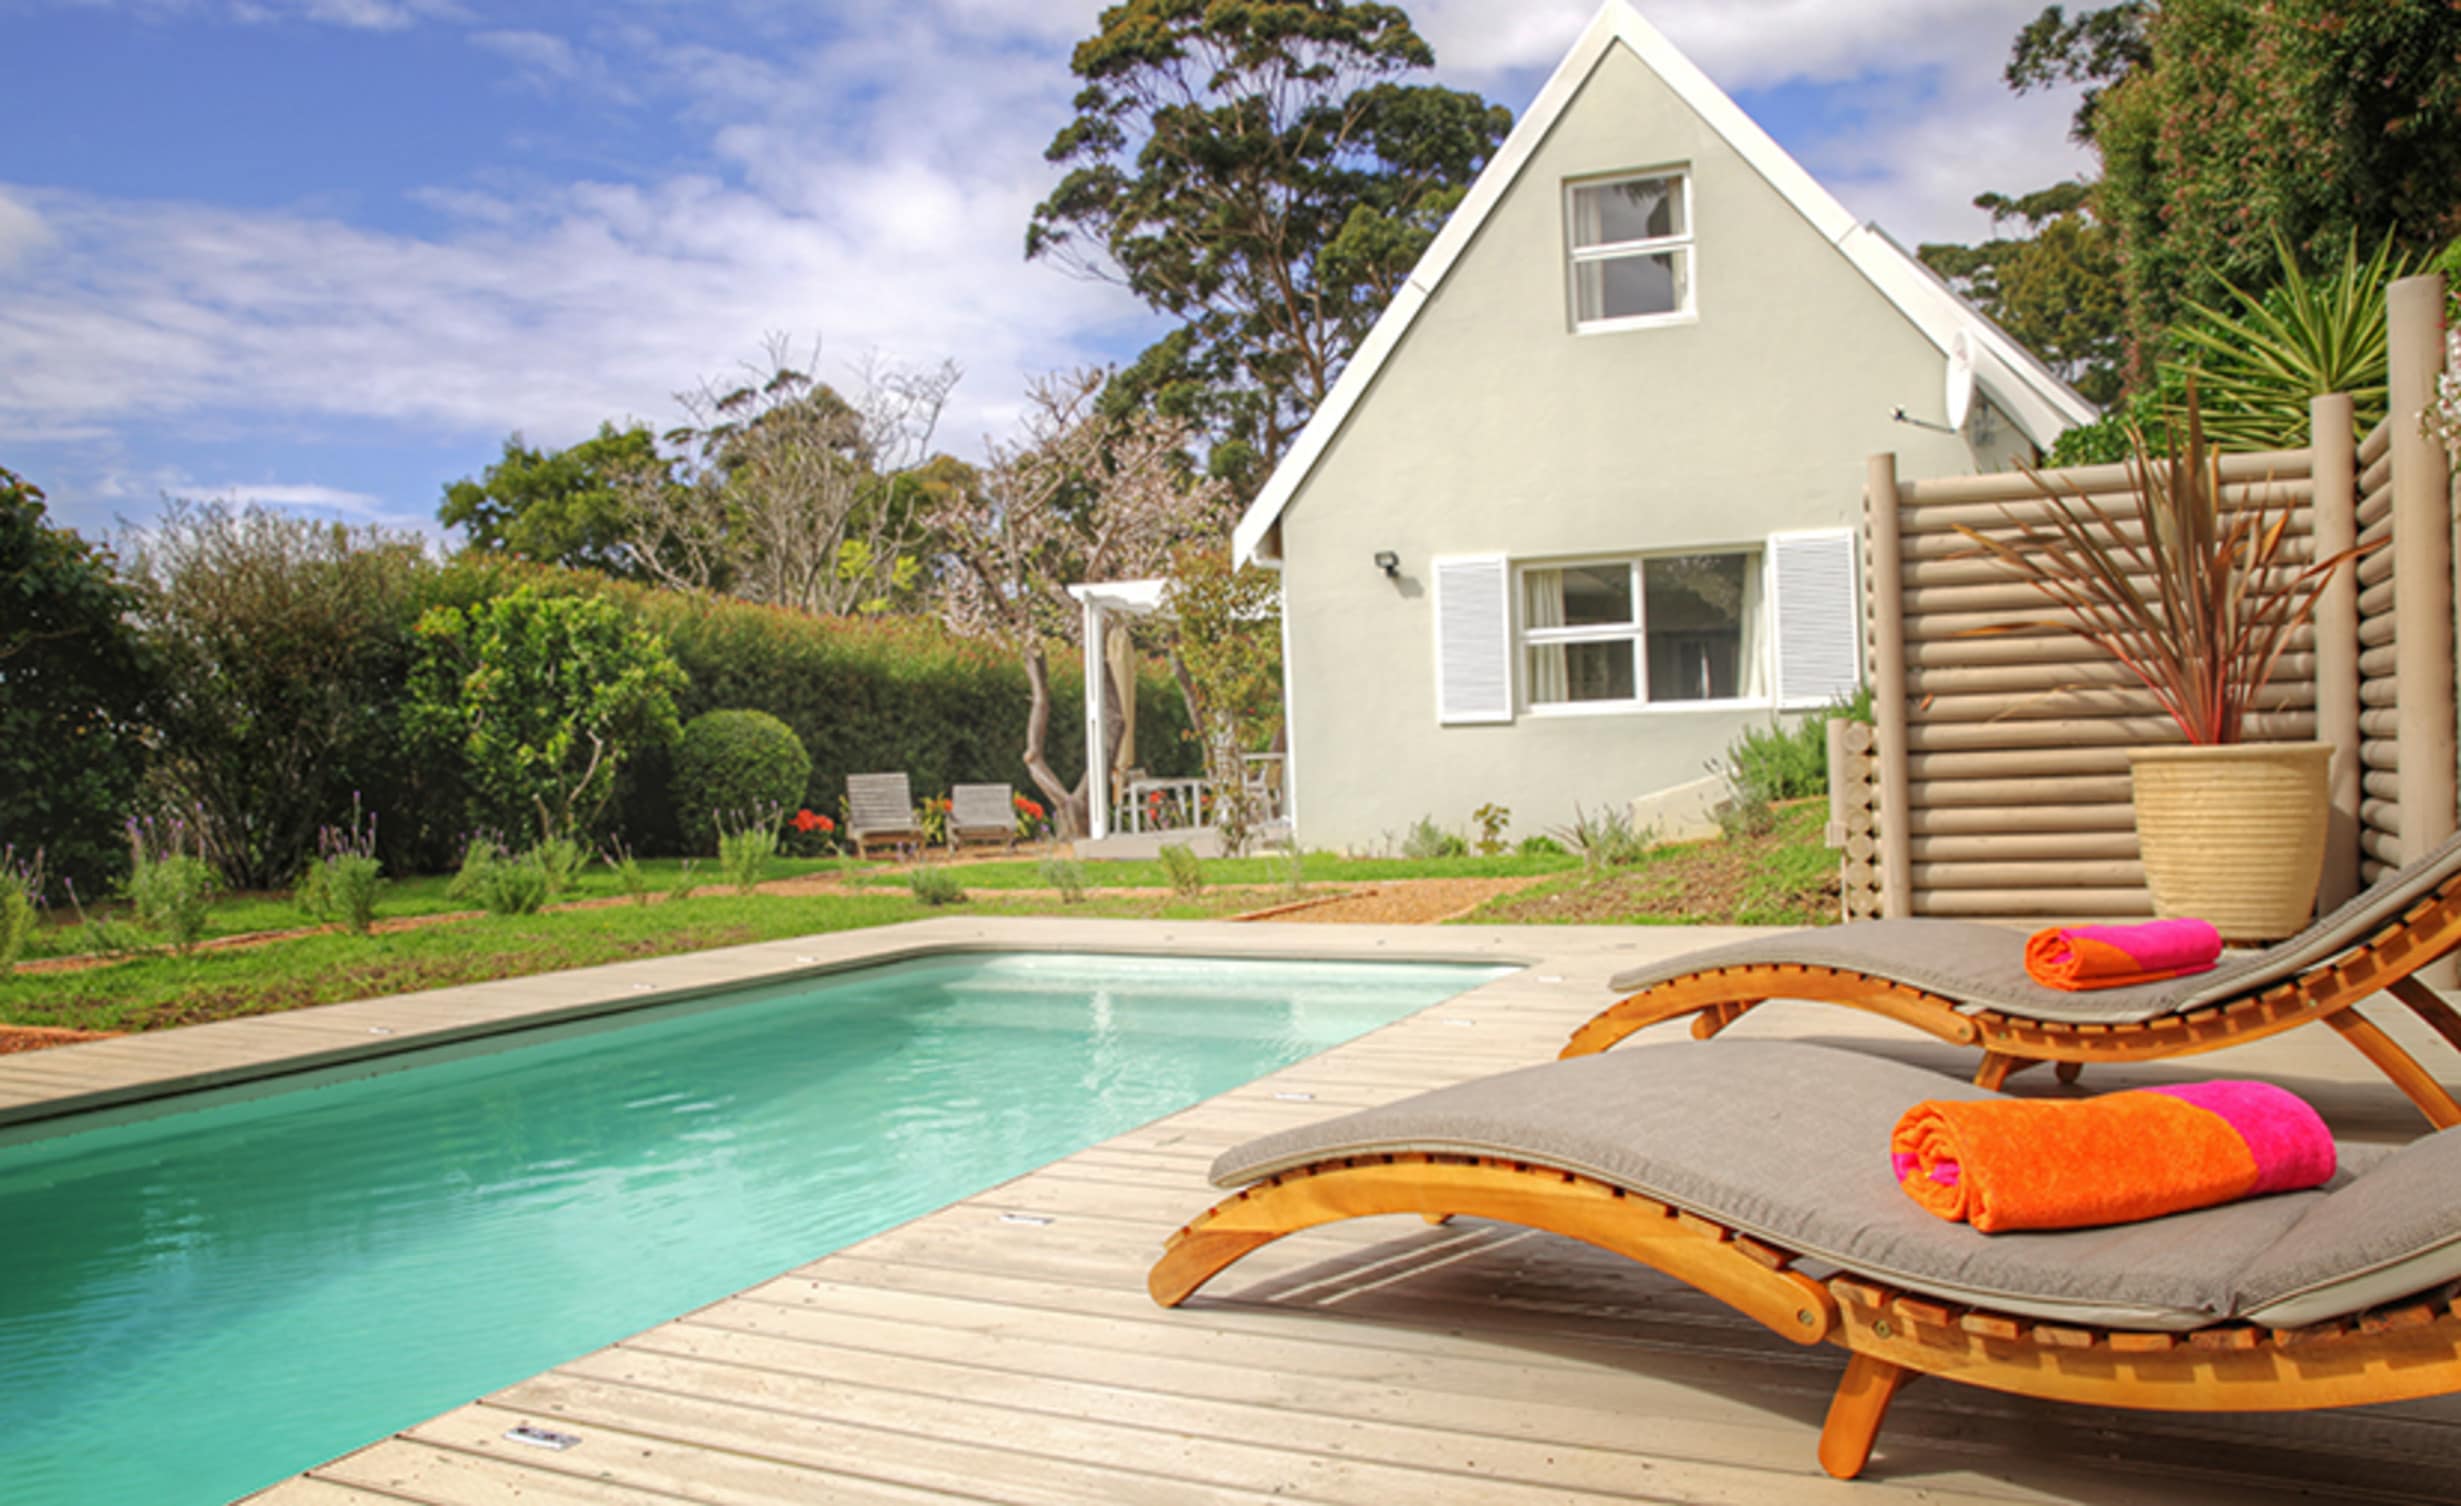 If your self catering accommodation has a pool, you’ll get it all to yourself